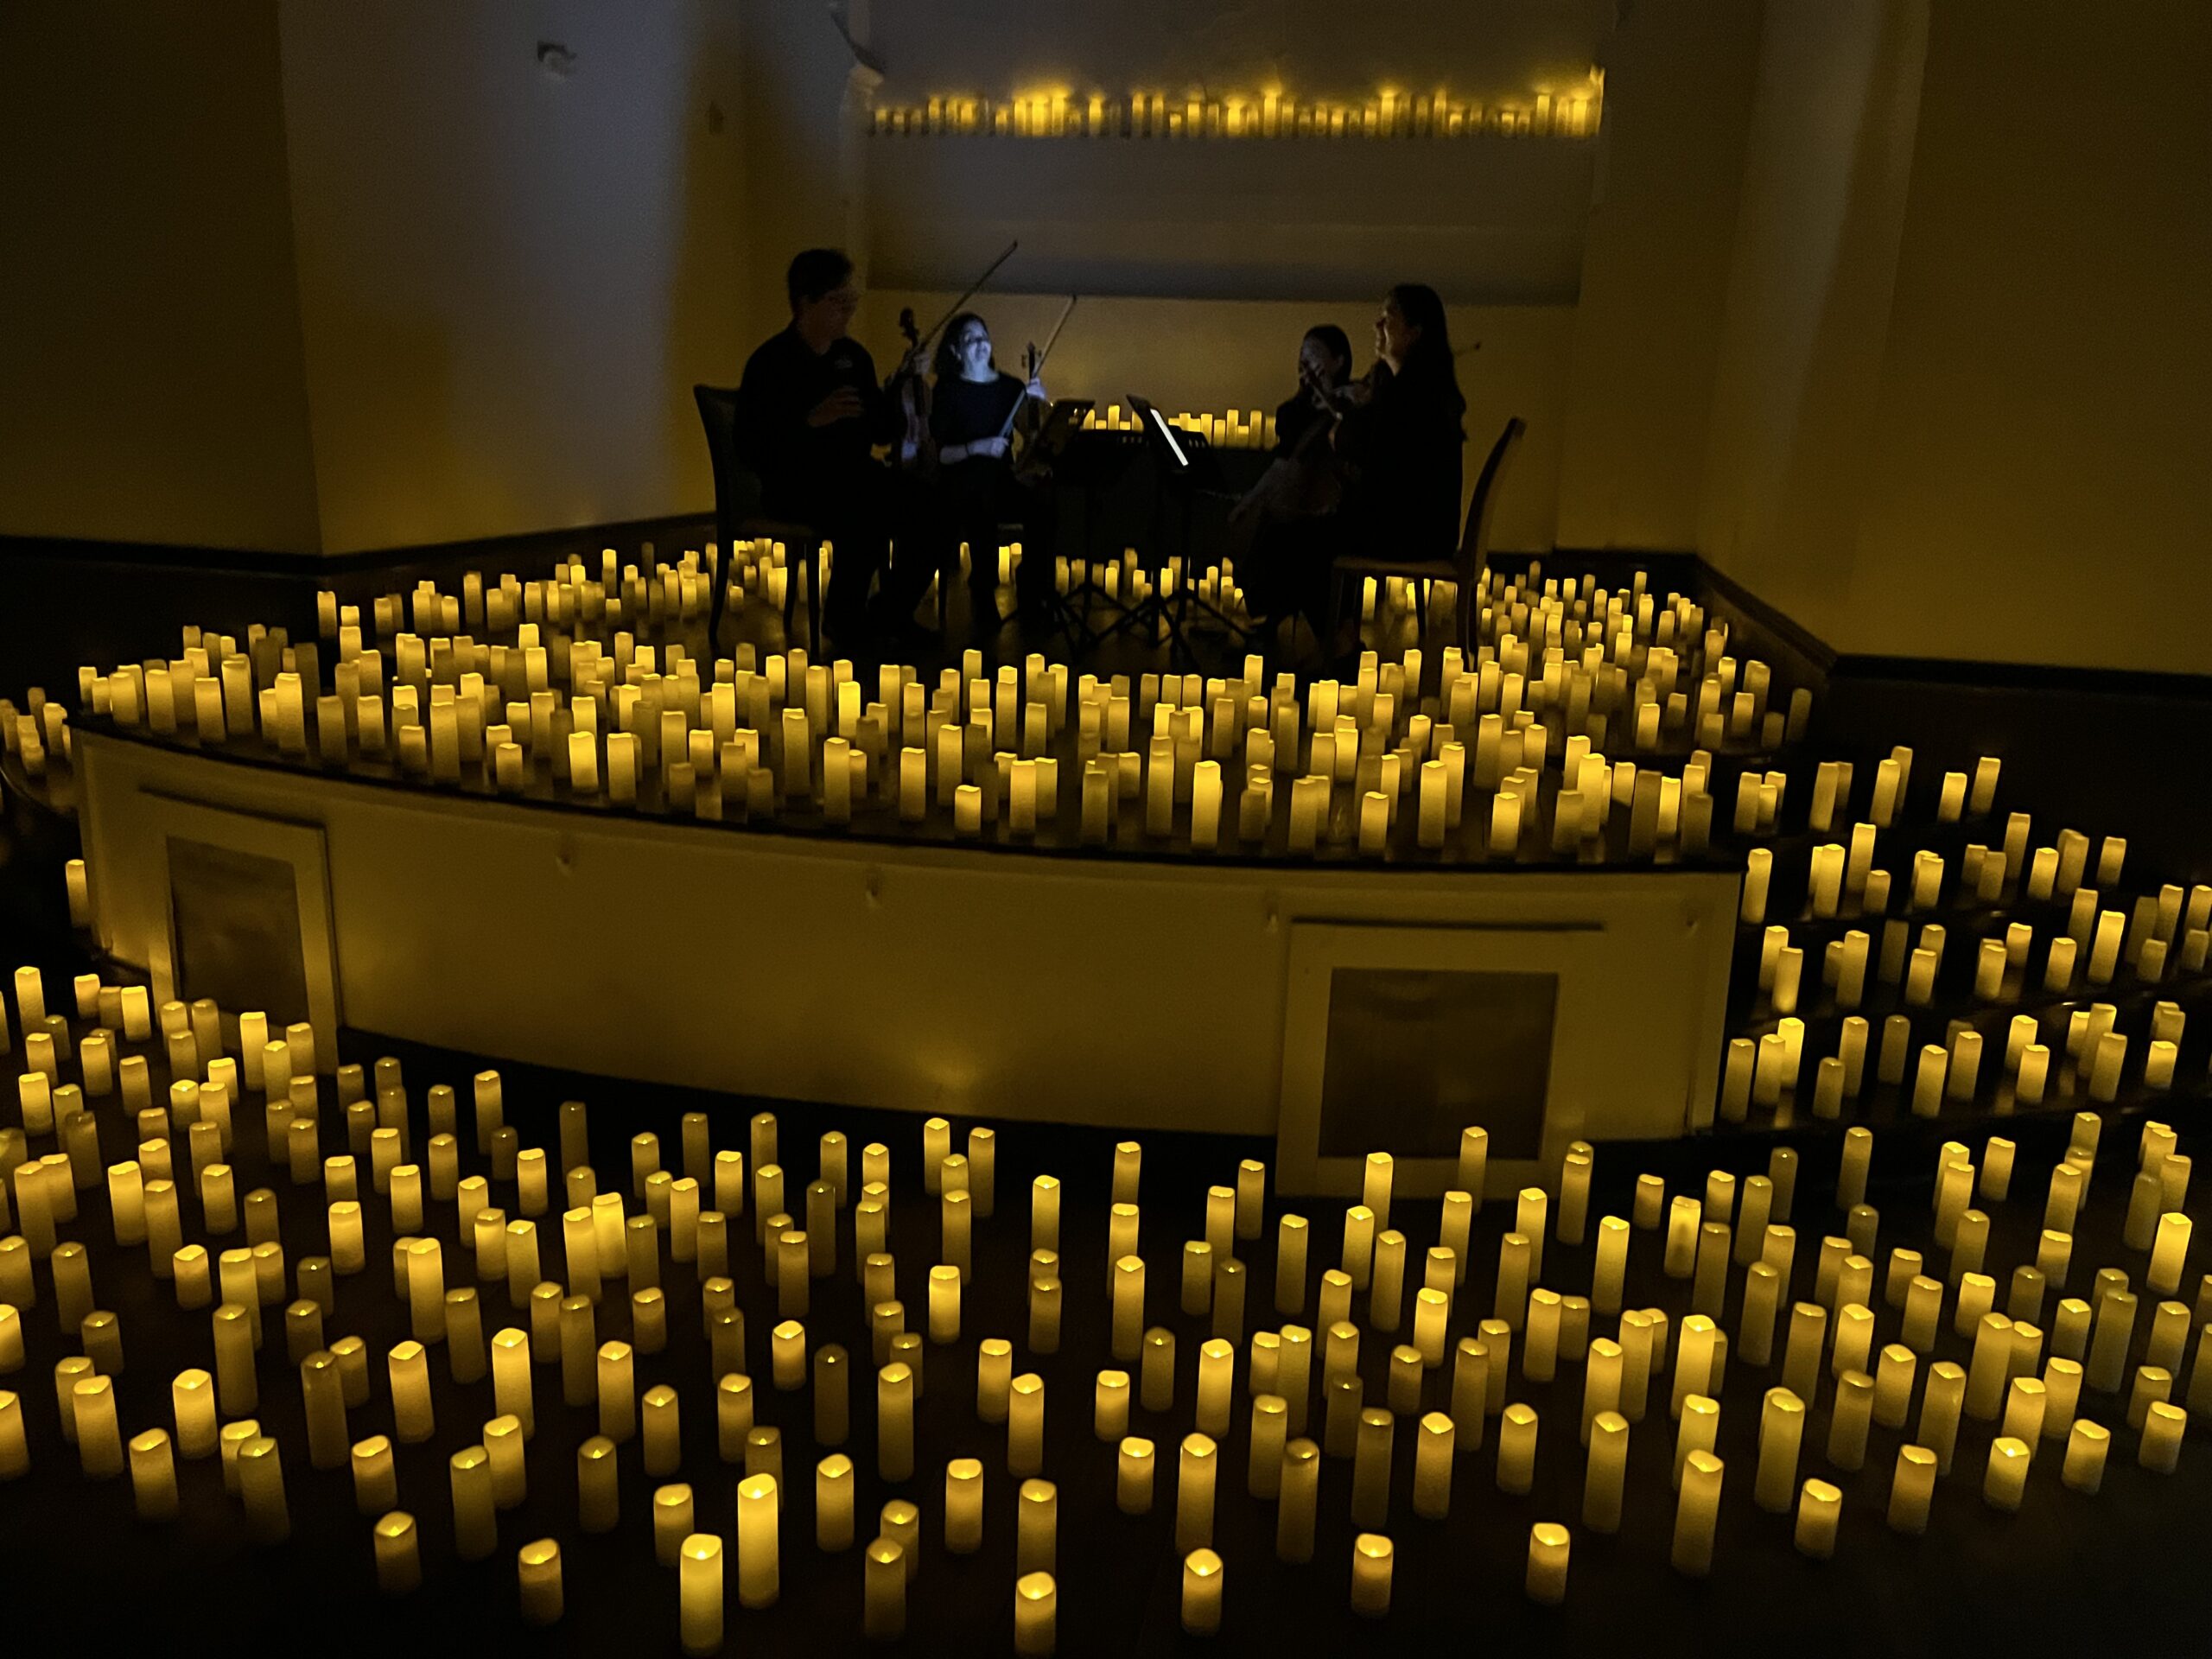 Candlelight Concerts